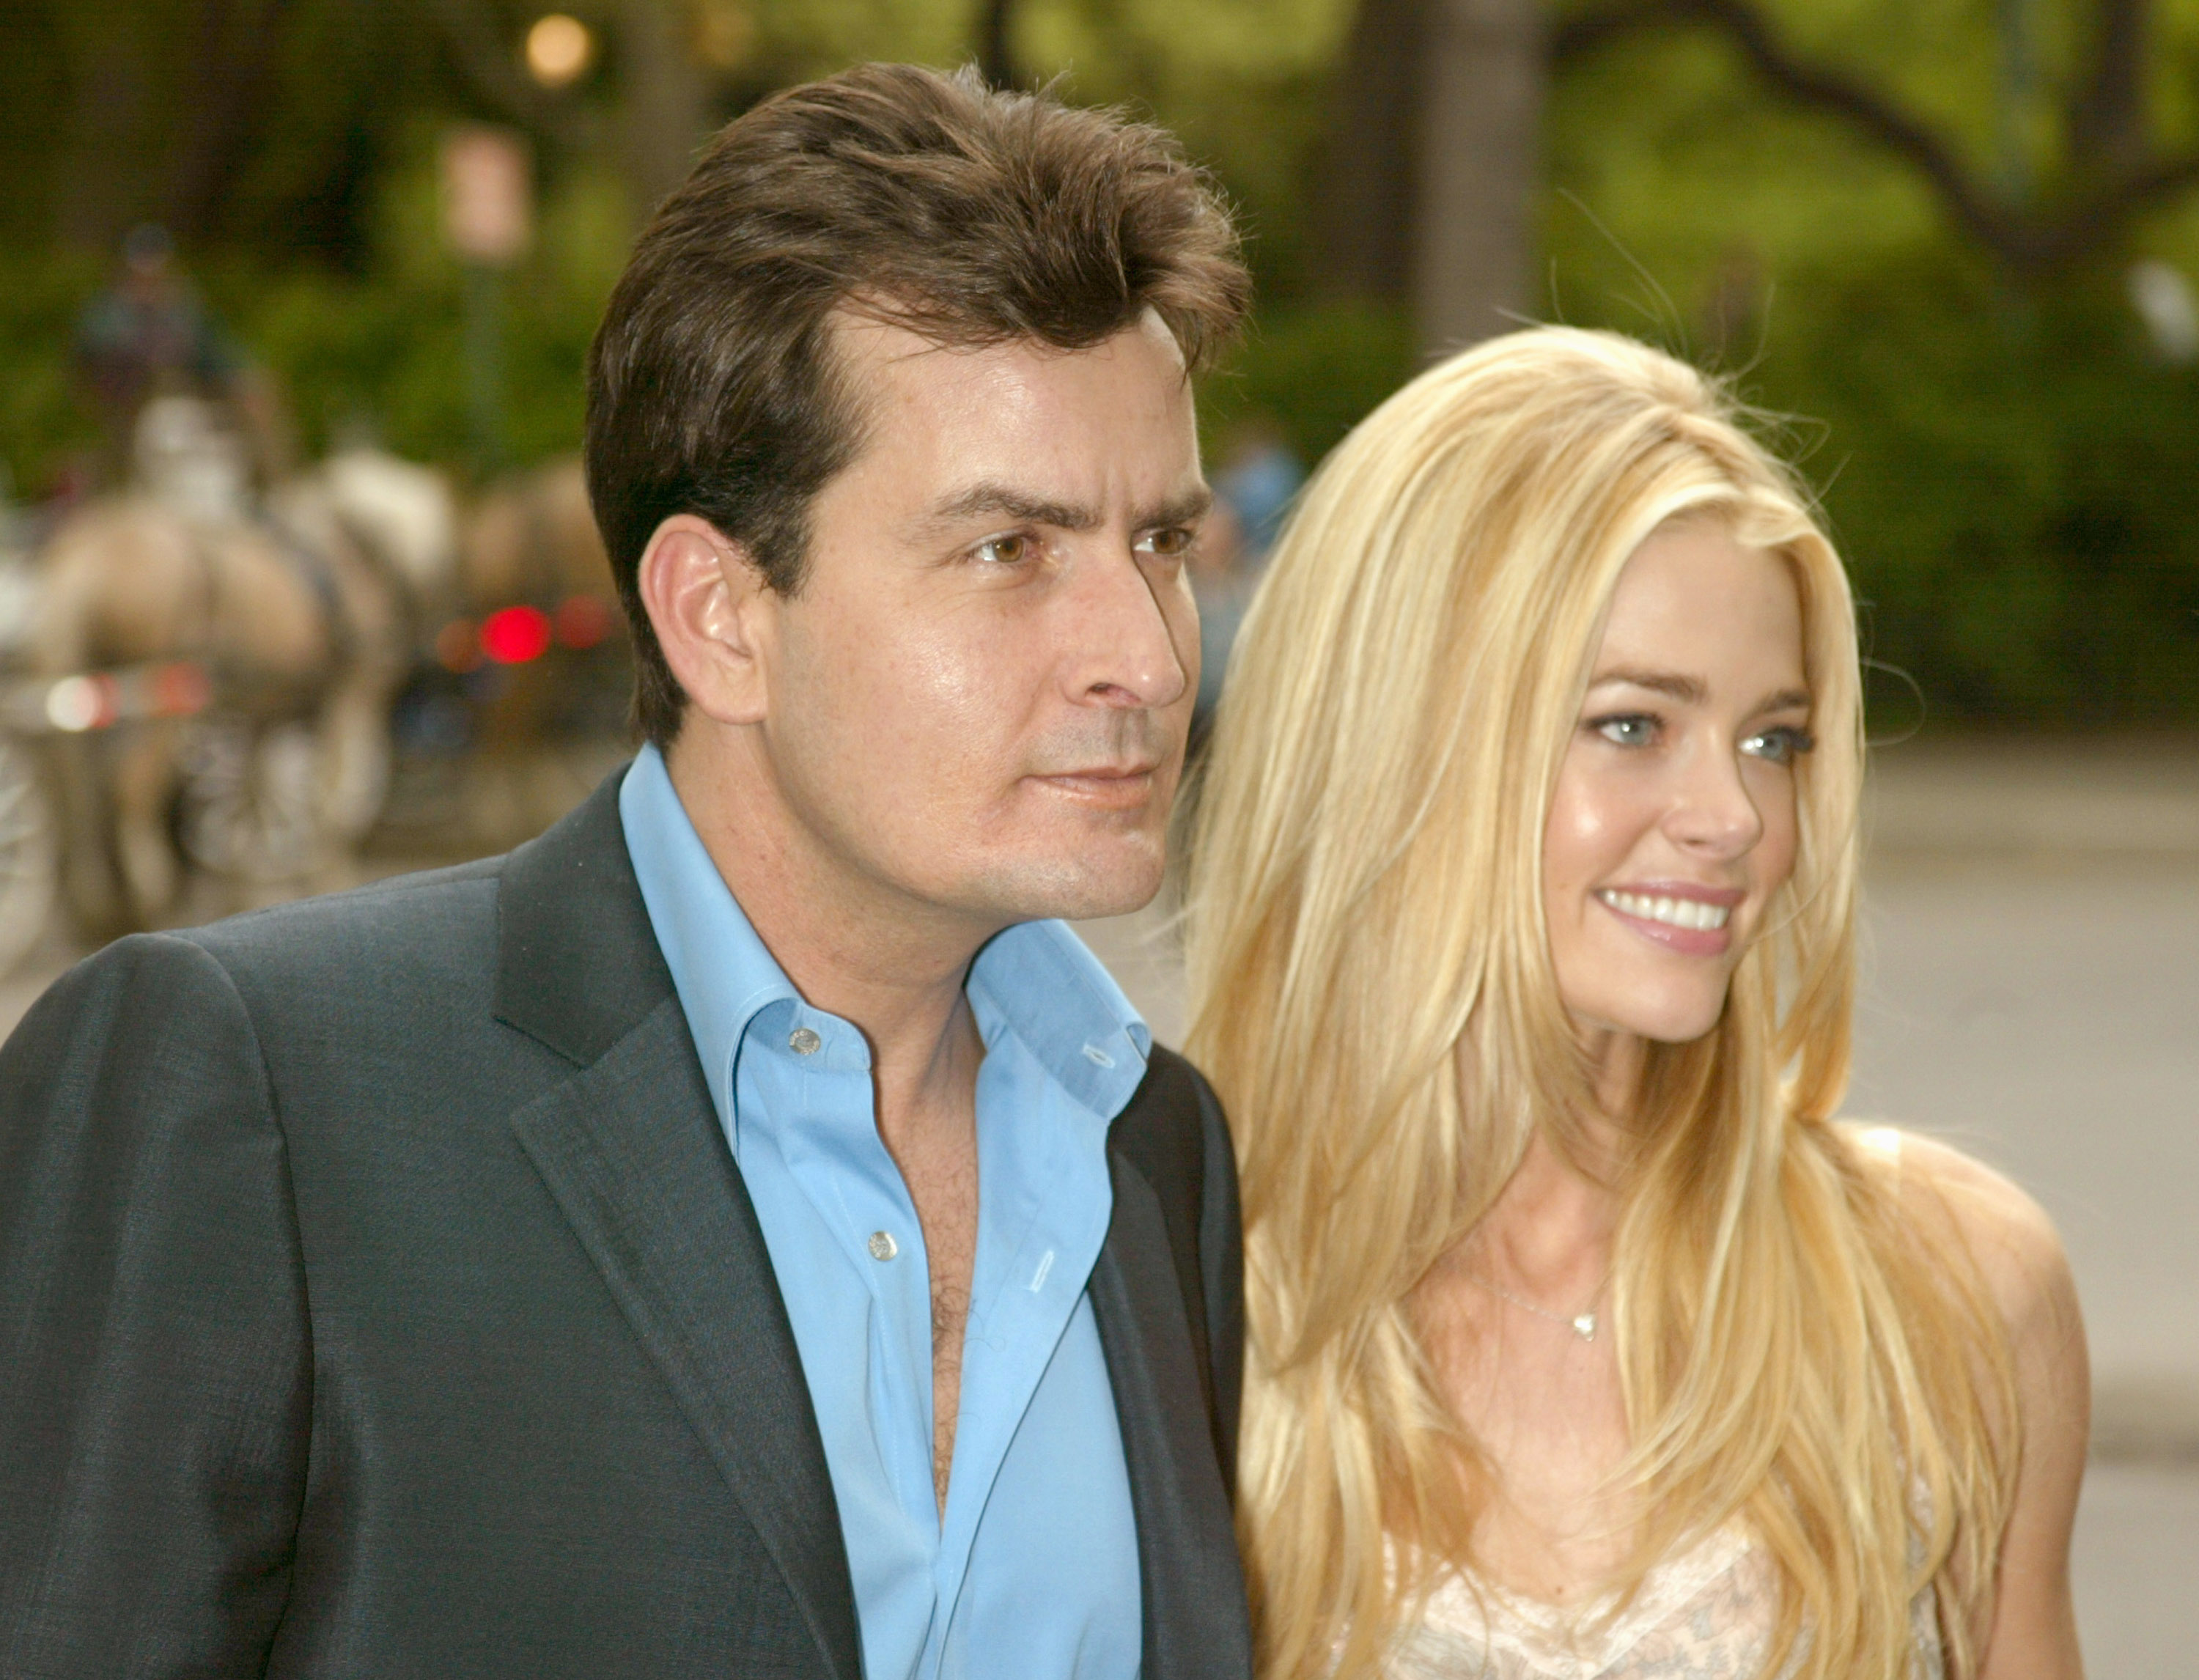 Charlie Sheen and Denise Richards  in New York City on May 14, 2003 | Source: Getty Images